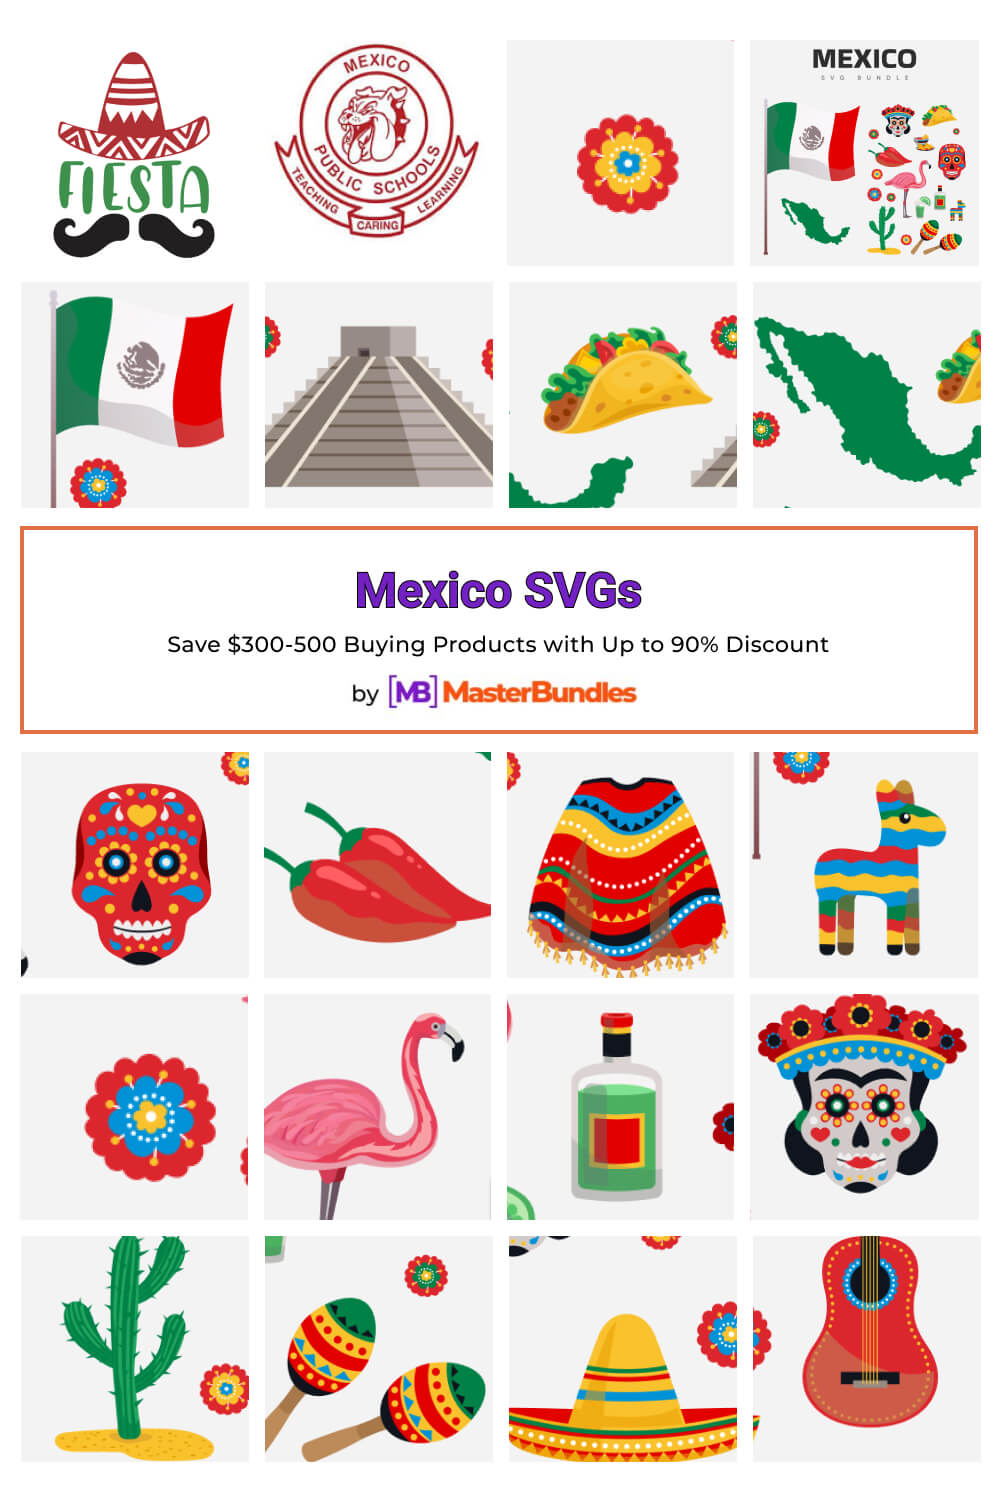 mexico svgs pinterest image.